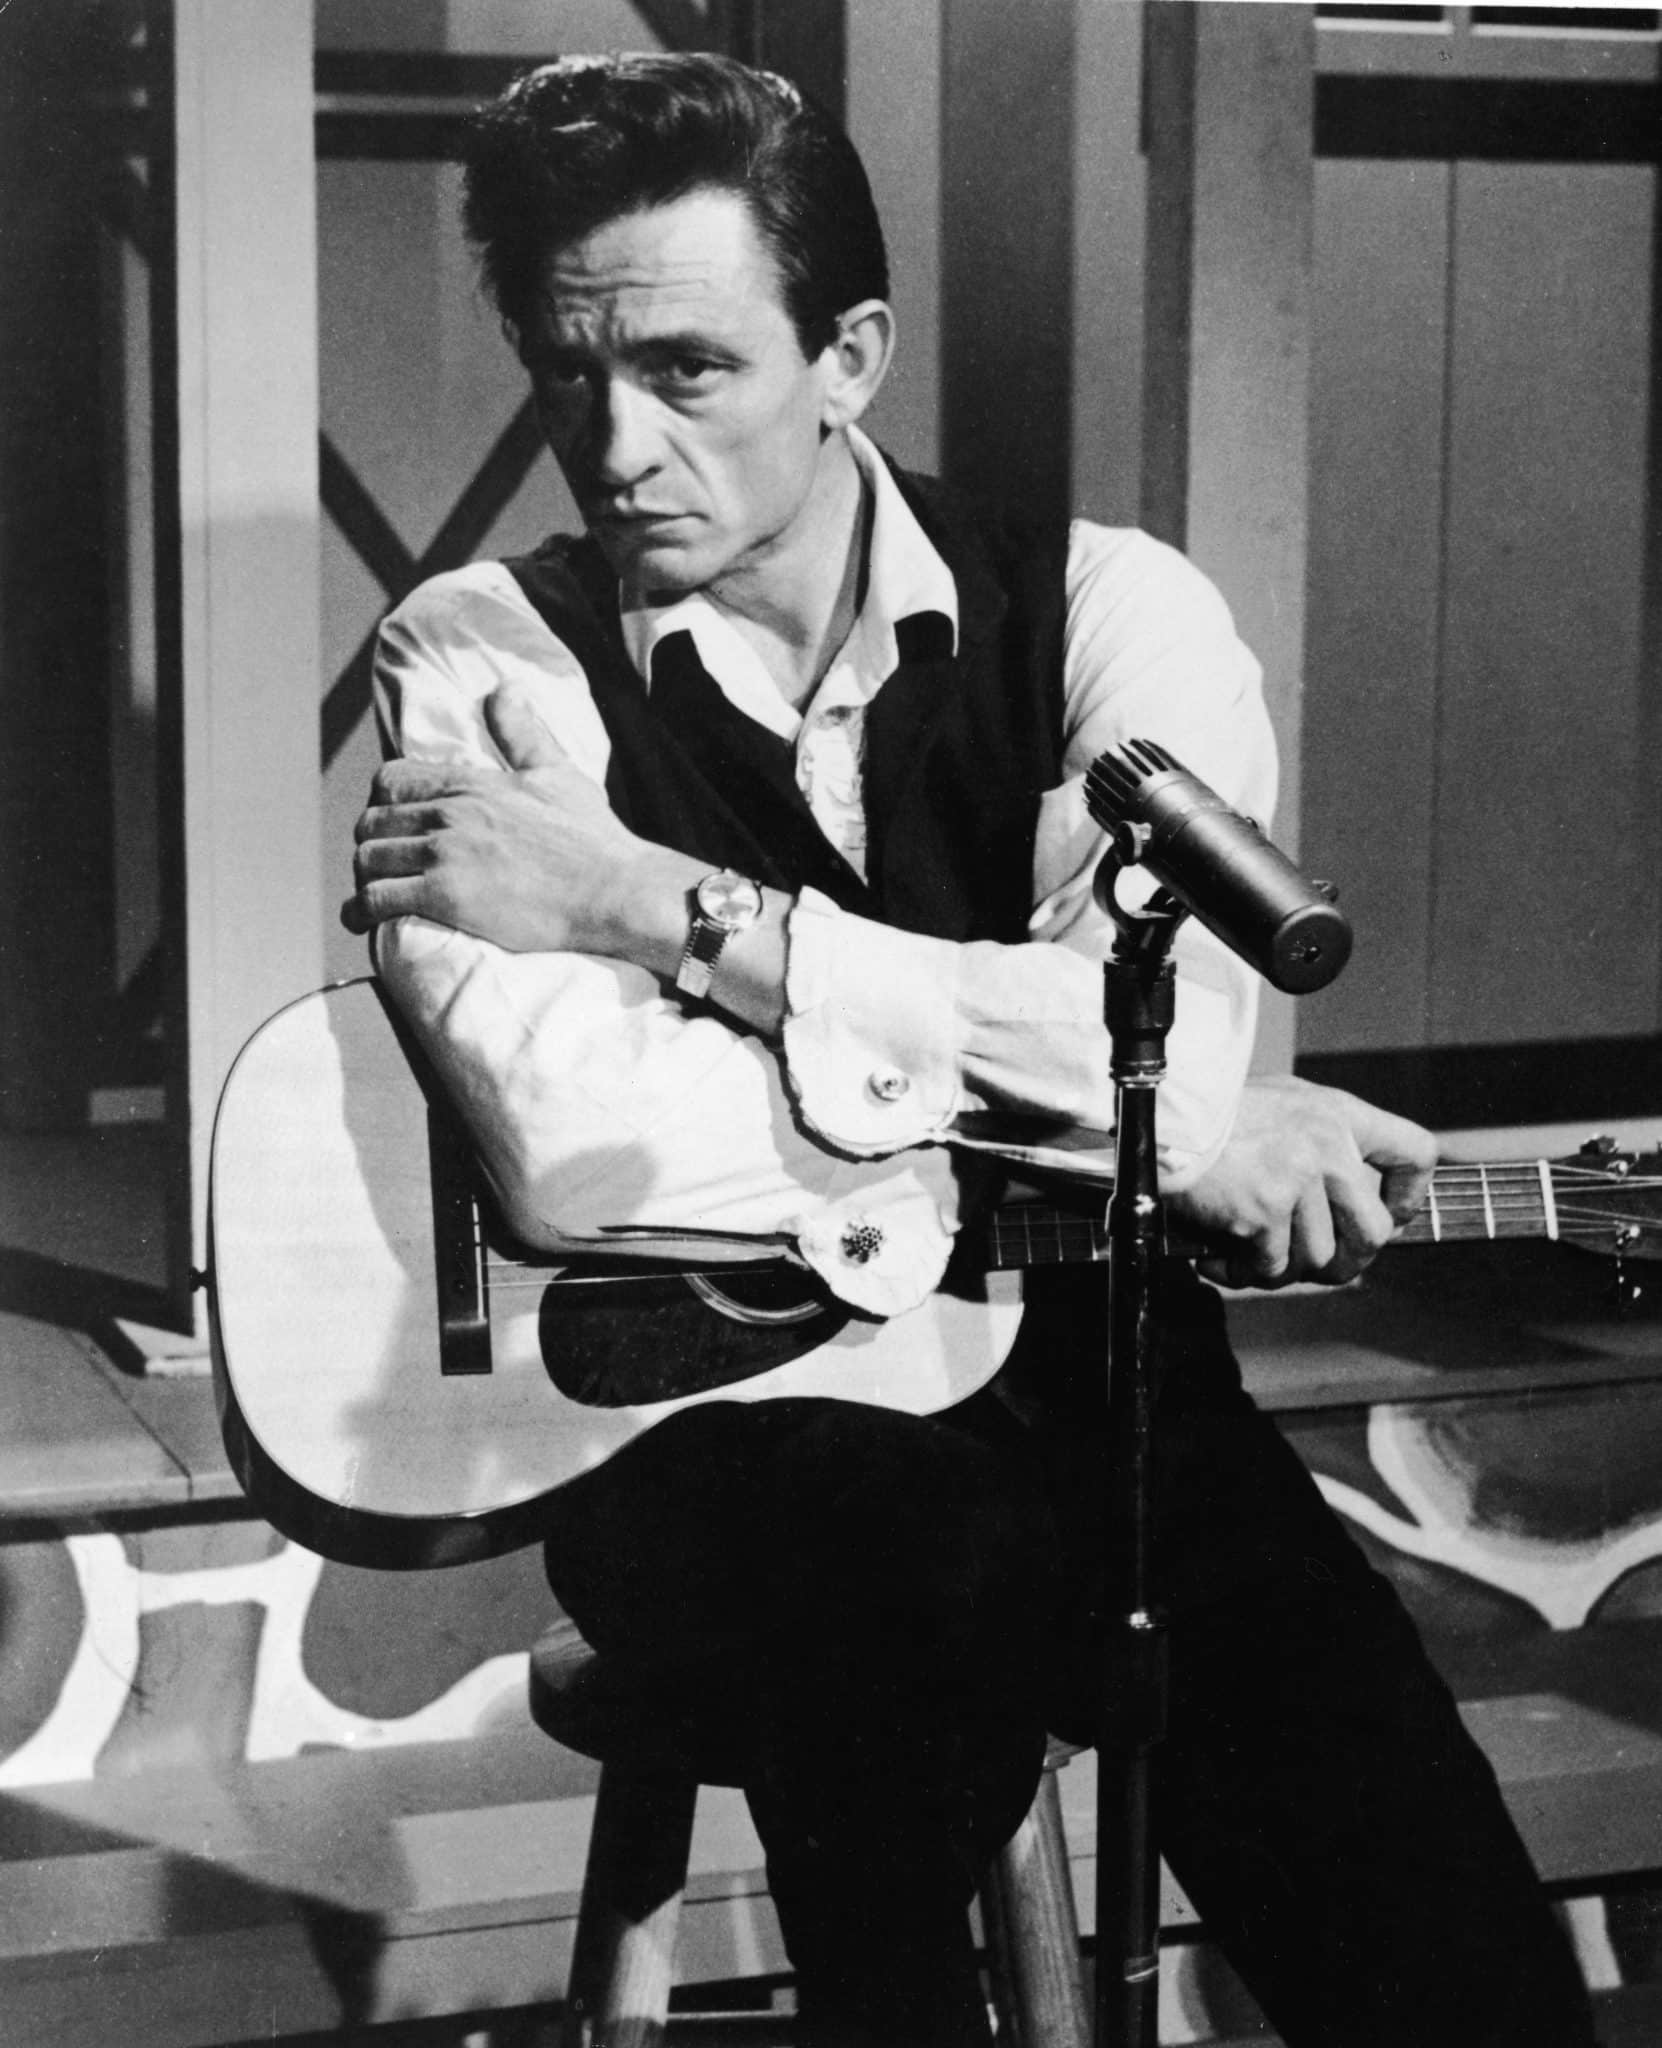 American country singer Johnny Cash (1932 - 2003) sits with an acoustic guitar in a still from the film, 'Road To Nashville,' directed by Will Zenz, 1966. 